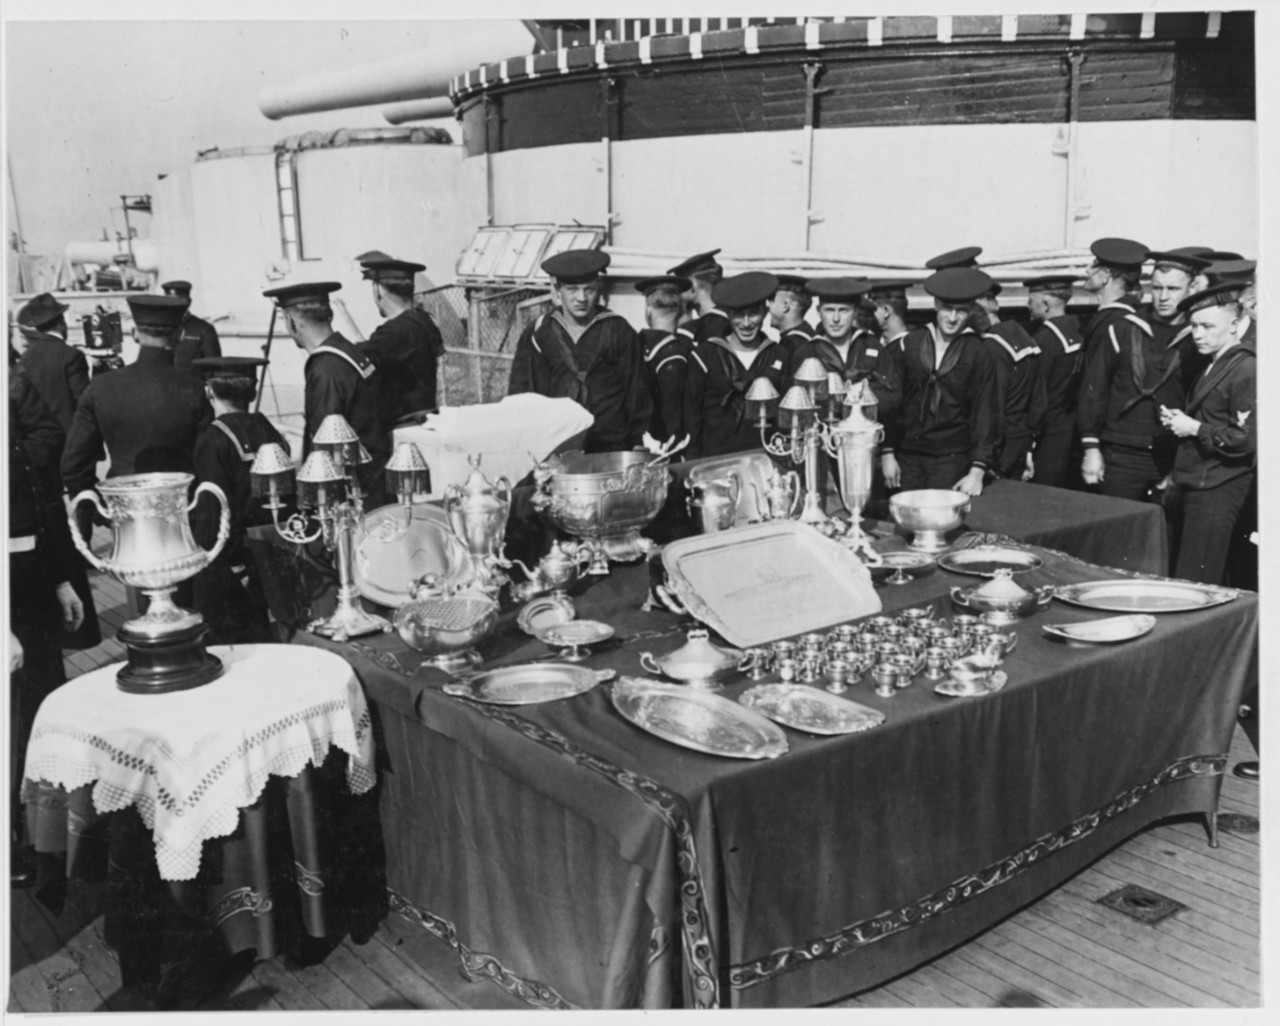 Crewmen examine the silver service following the presentation ceremony, 23 April 1919. (Naval History and Heritage Command Photograph NH 57686)